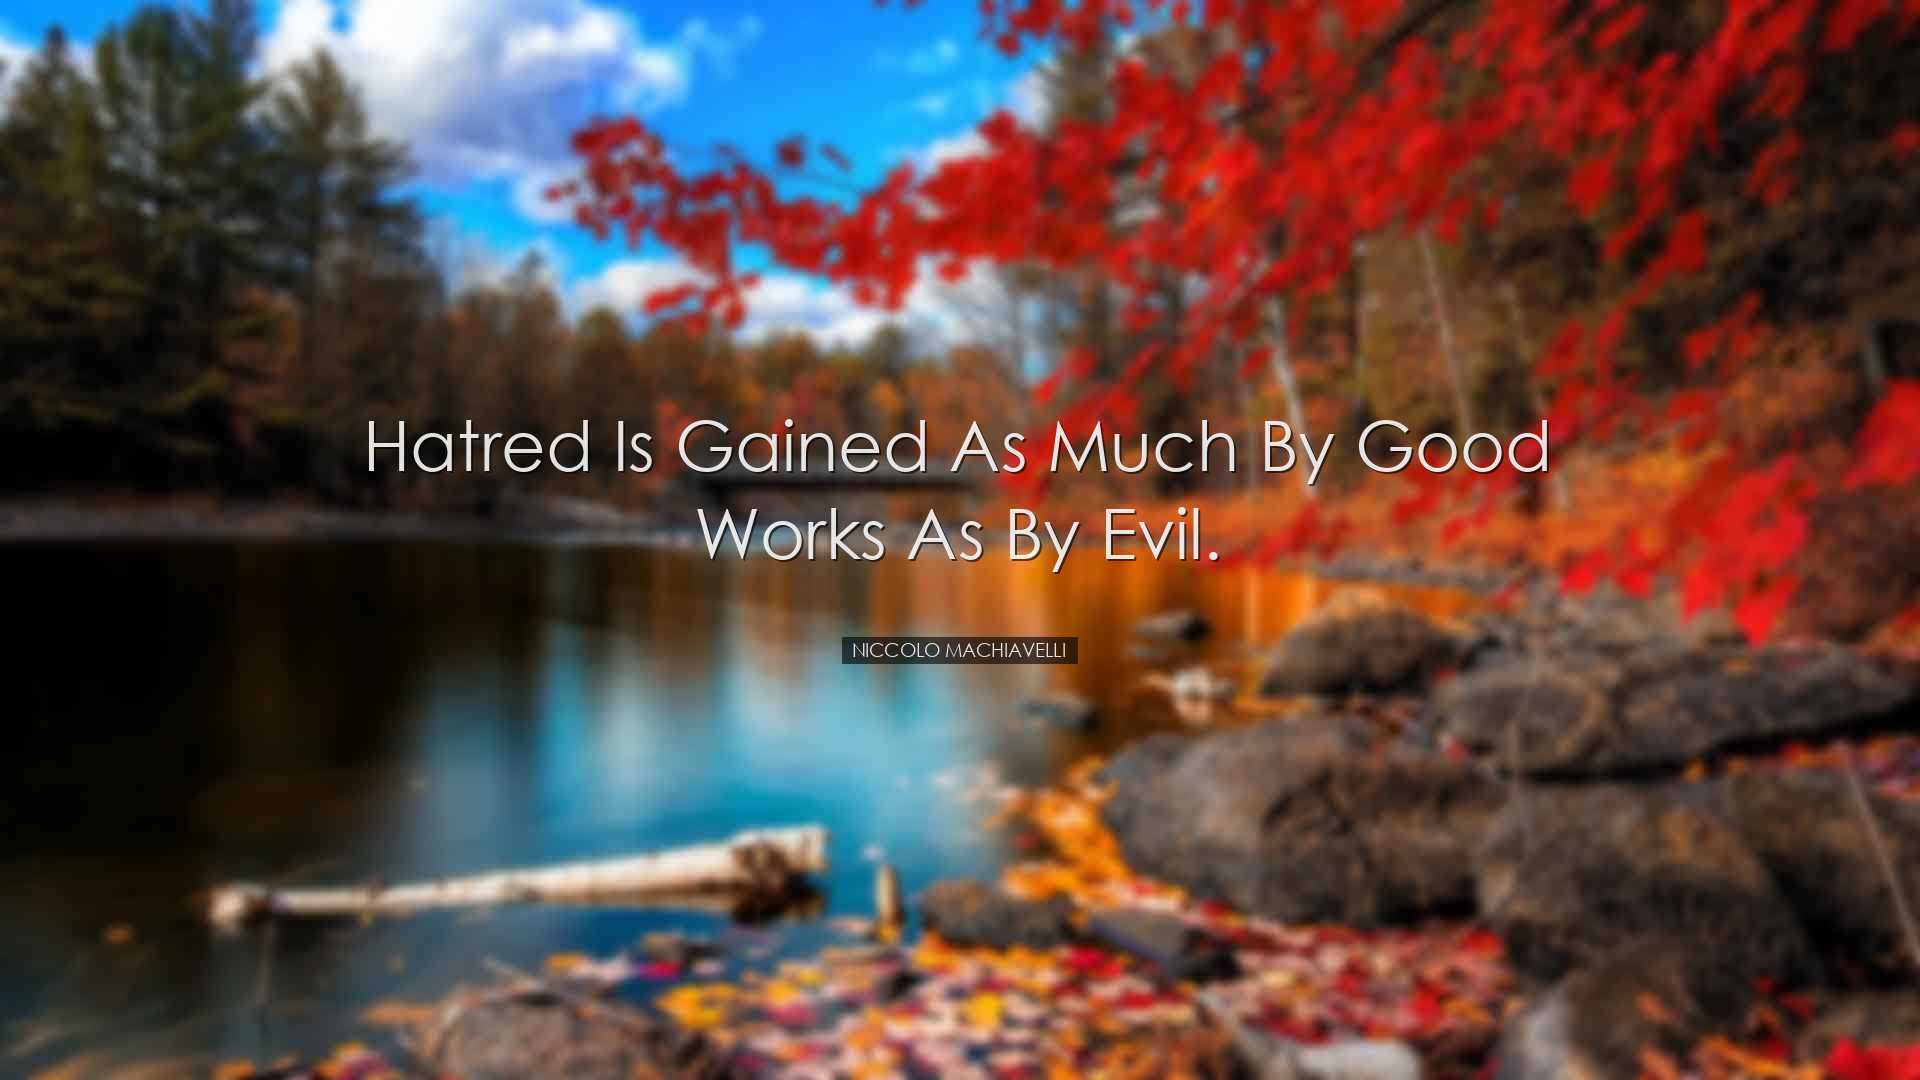 Hatred is gained as much by good works as by evil. - Niccolo Machi